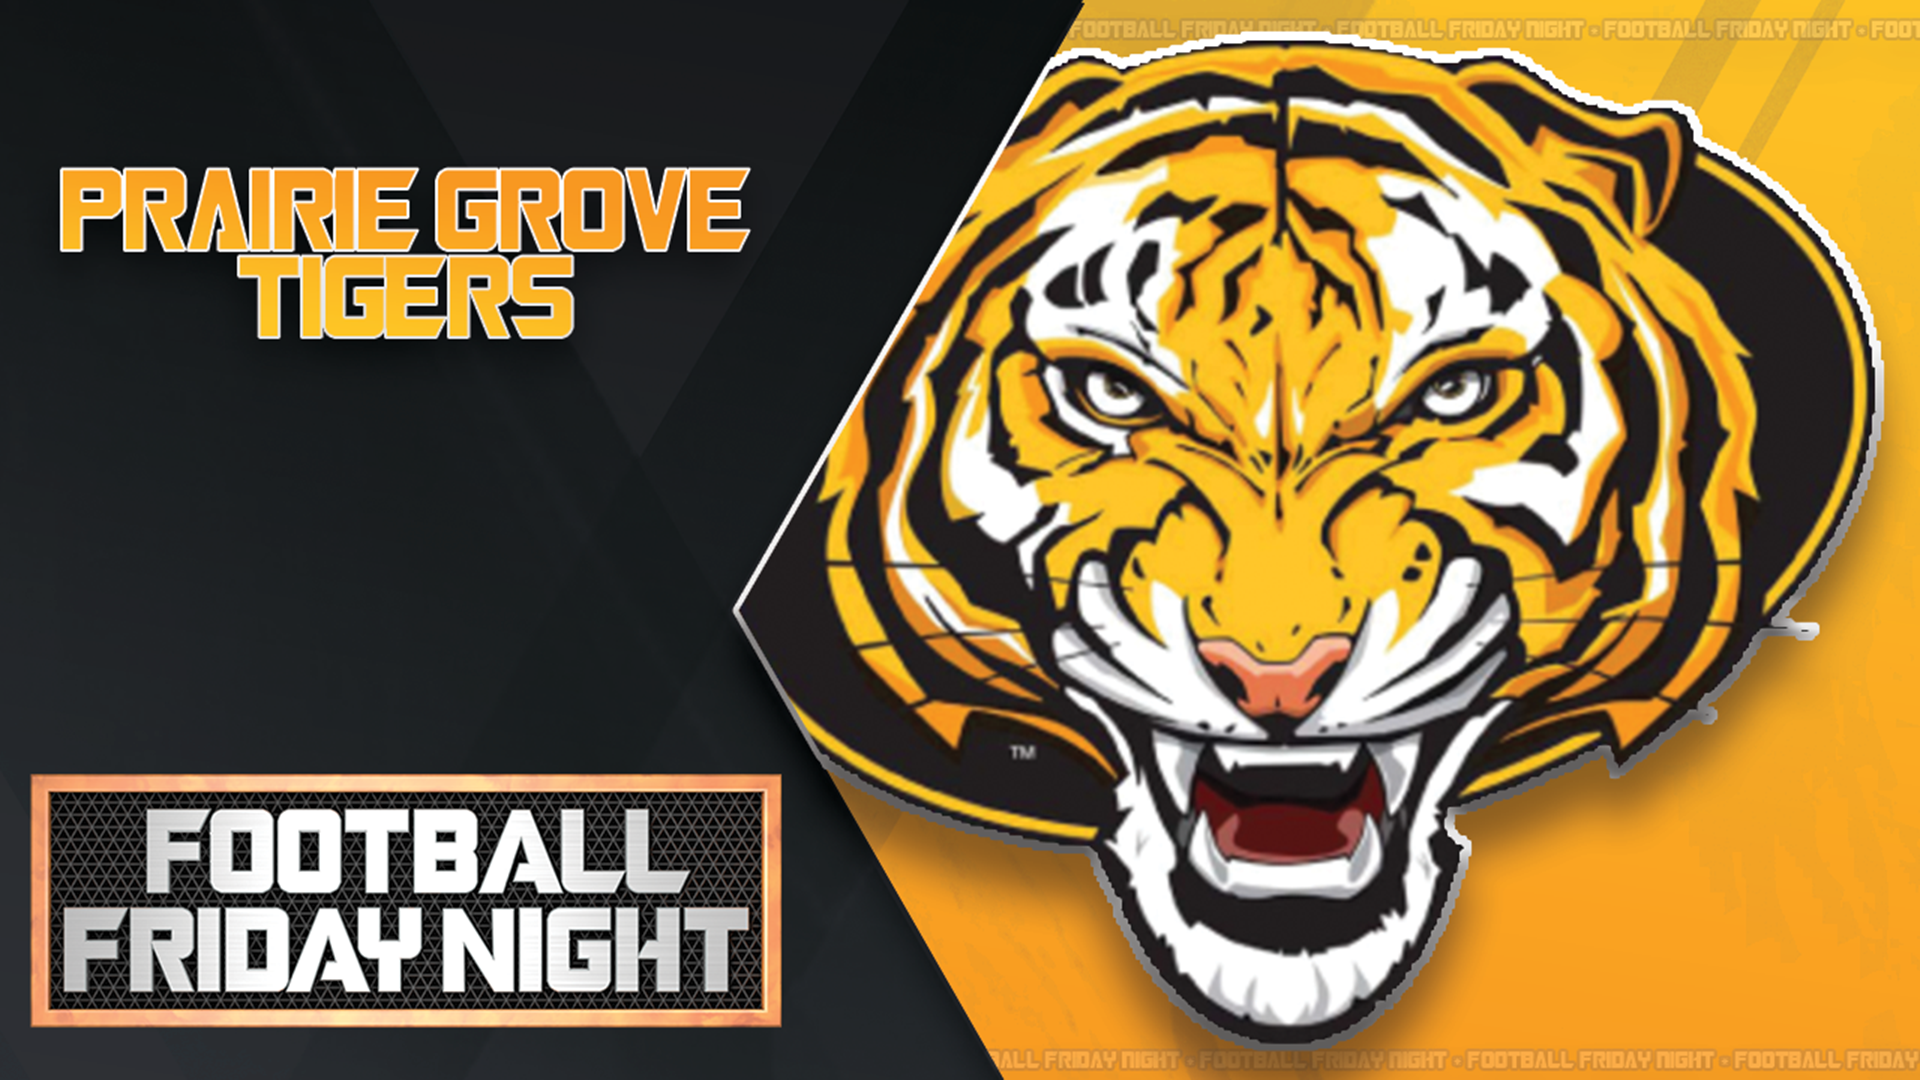 After a 9-3 season and trip to the playoffs in 2021, Prairie Grove hopes to show it can do the same this year as it jumps from the 4A to the 5A